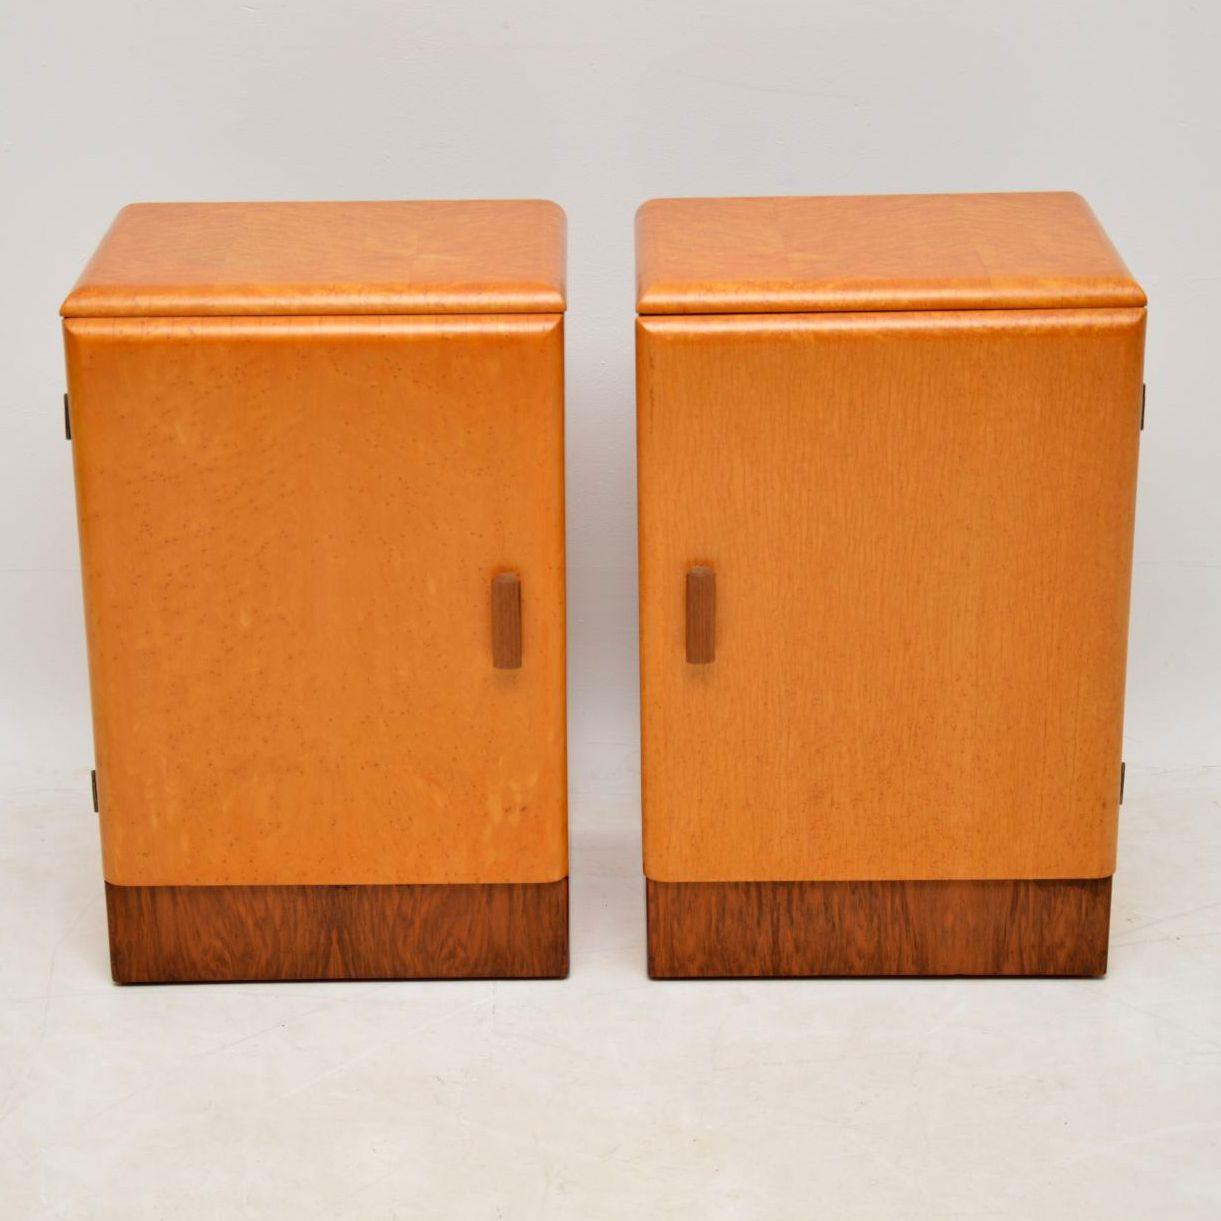 A stylish and well made pair of Art Deco bedside cabinets predominantly in bird's-eye maple, with walnut bases and handles, these date from around the 1930s-1950s. These are a great size, have a beautiful color and lovely grain patterns. We have had